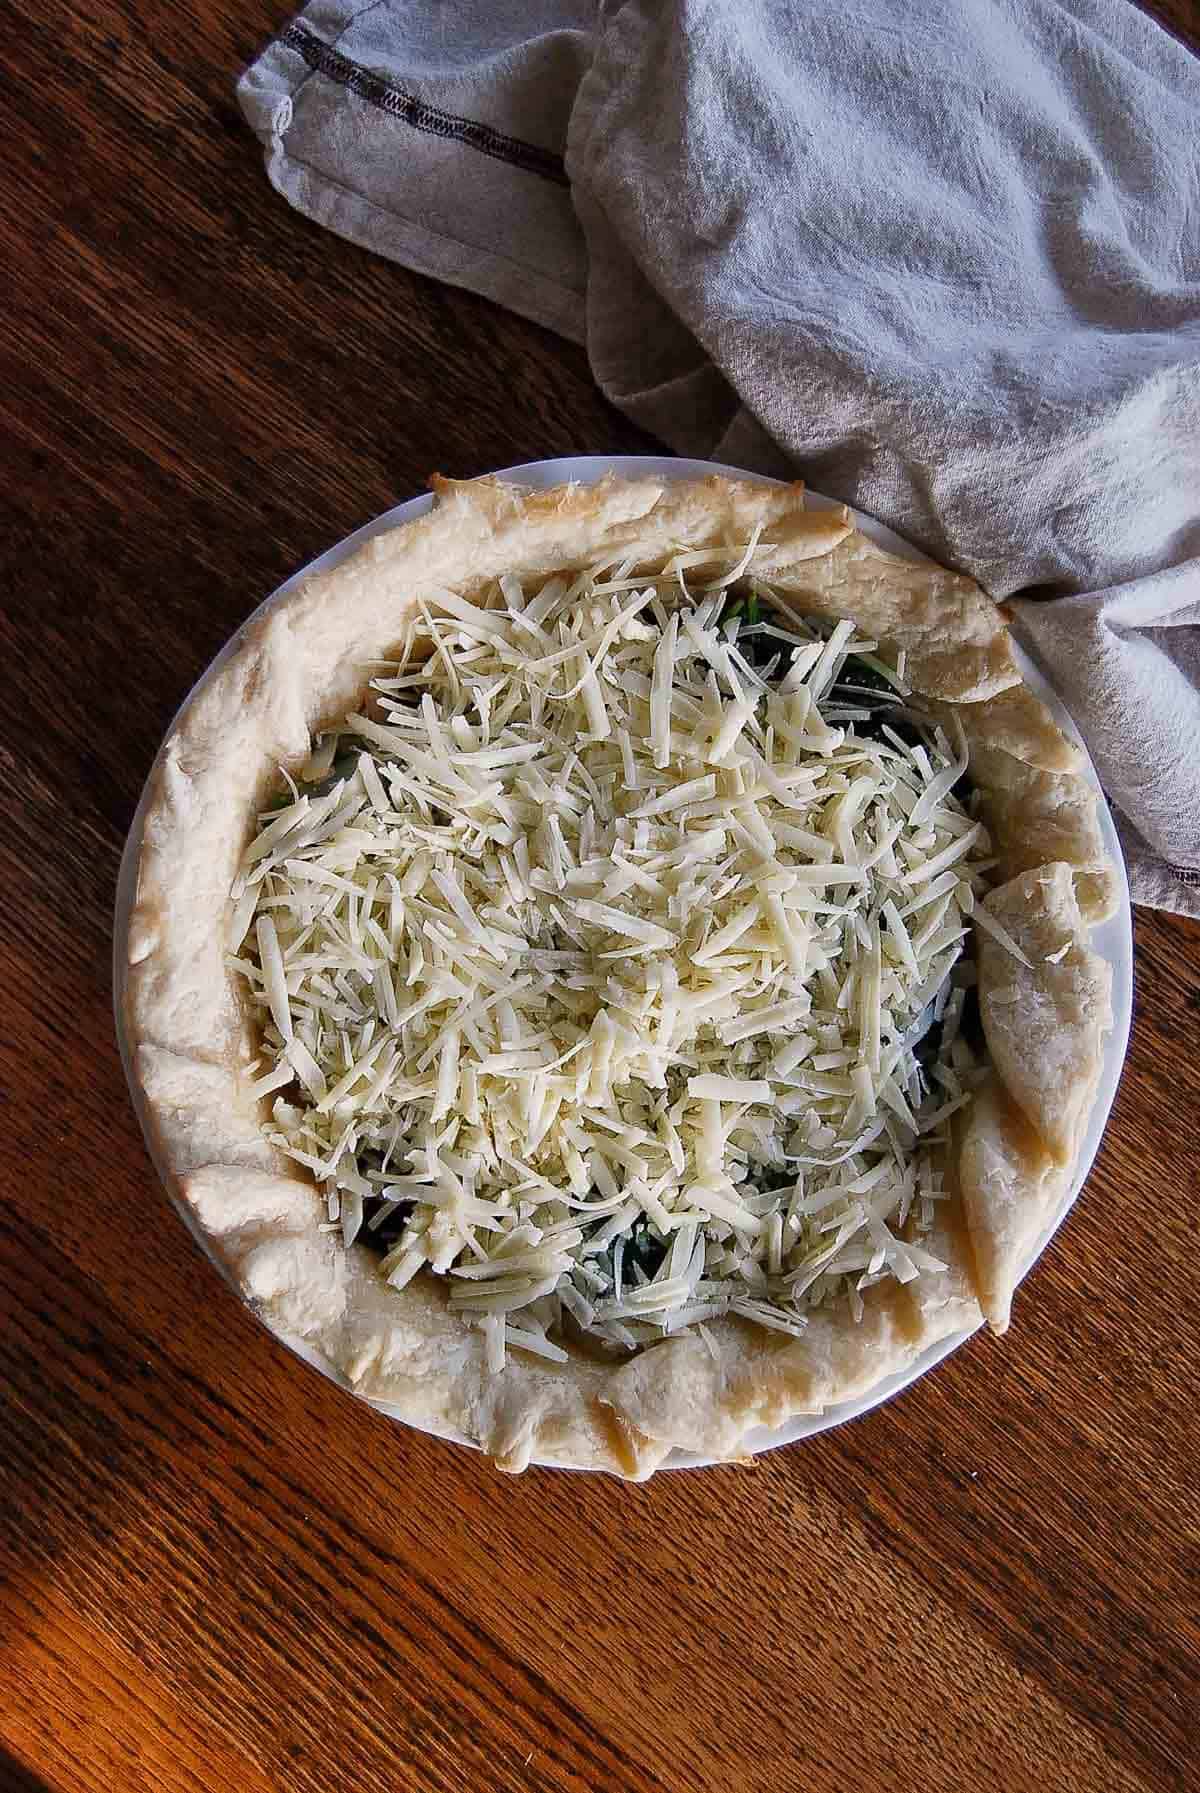 quiche florentine with spinach and cheese.